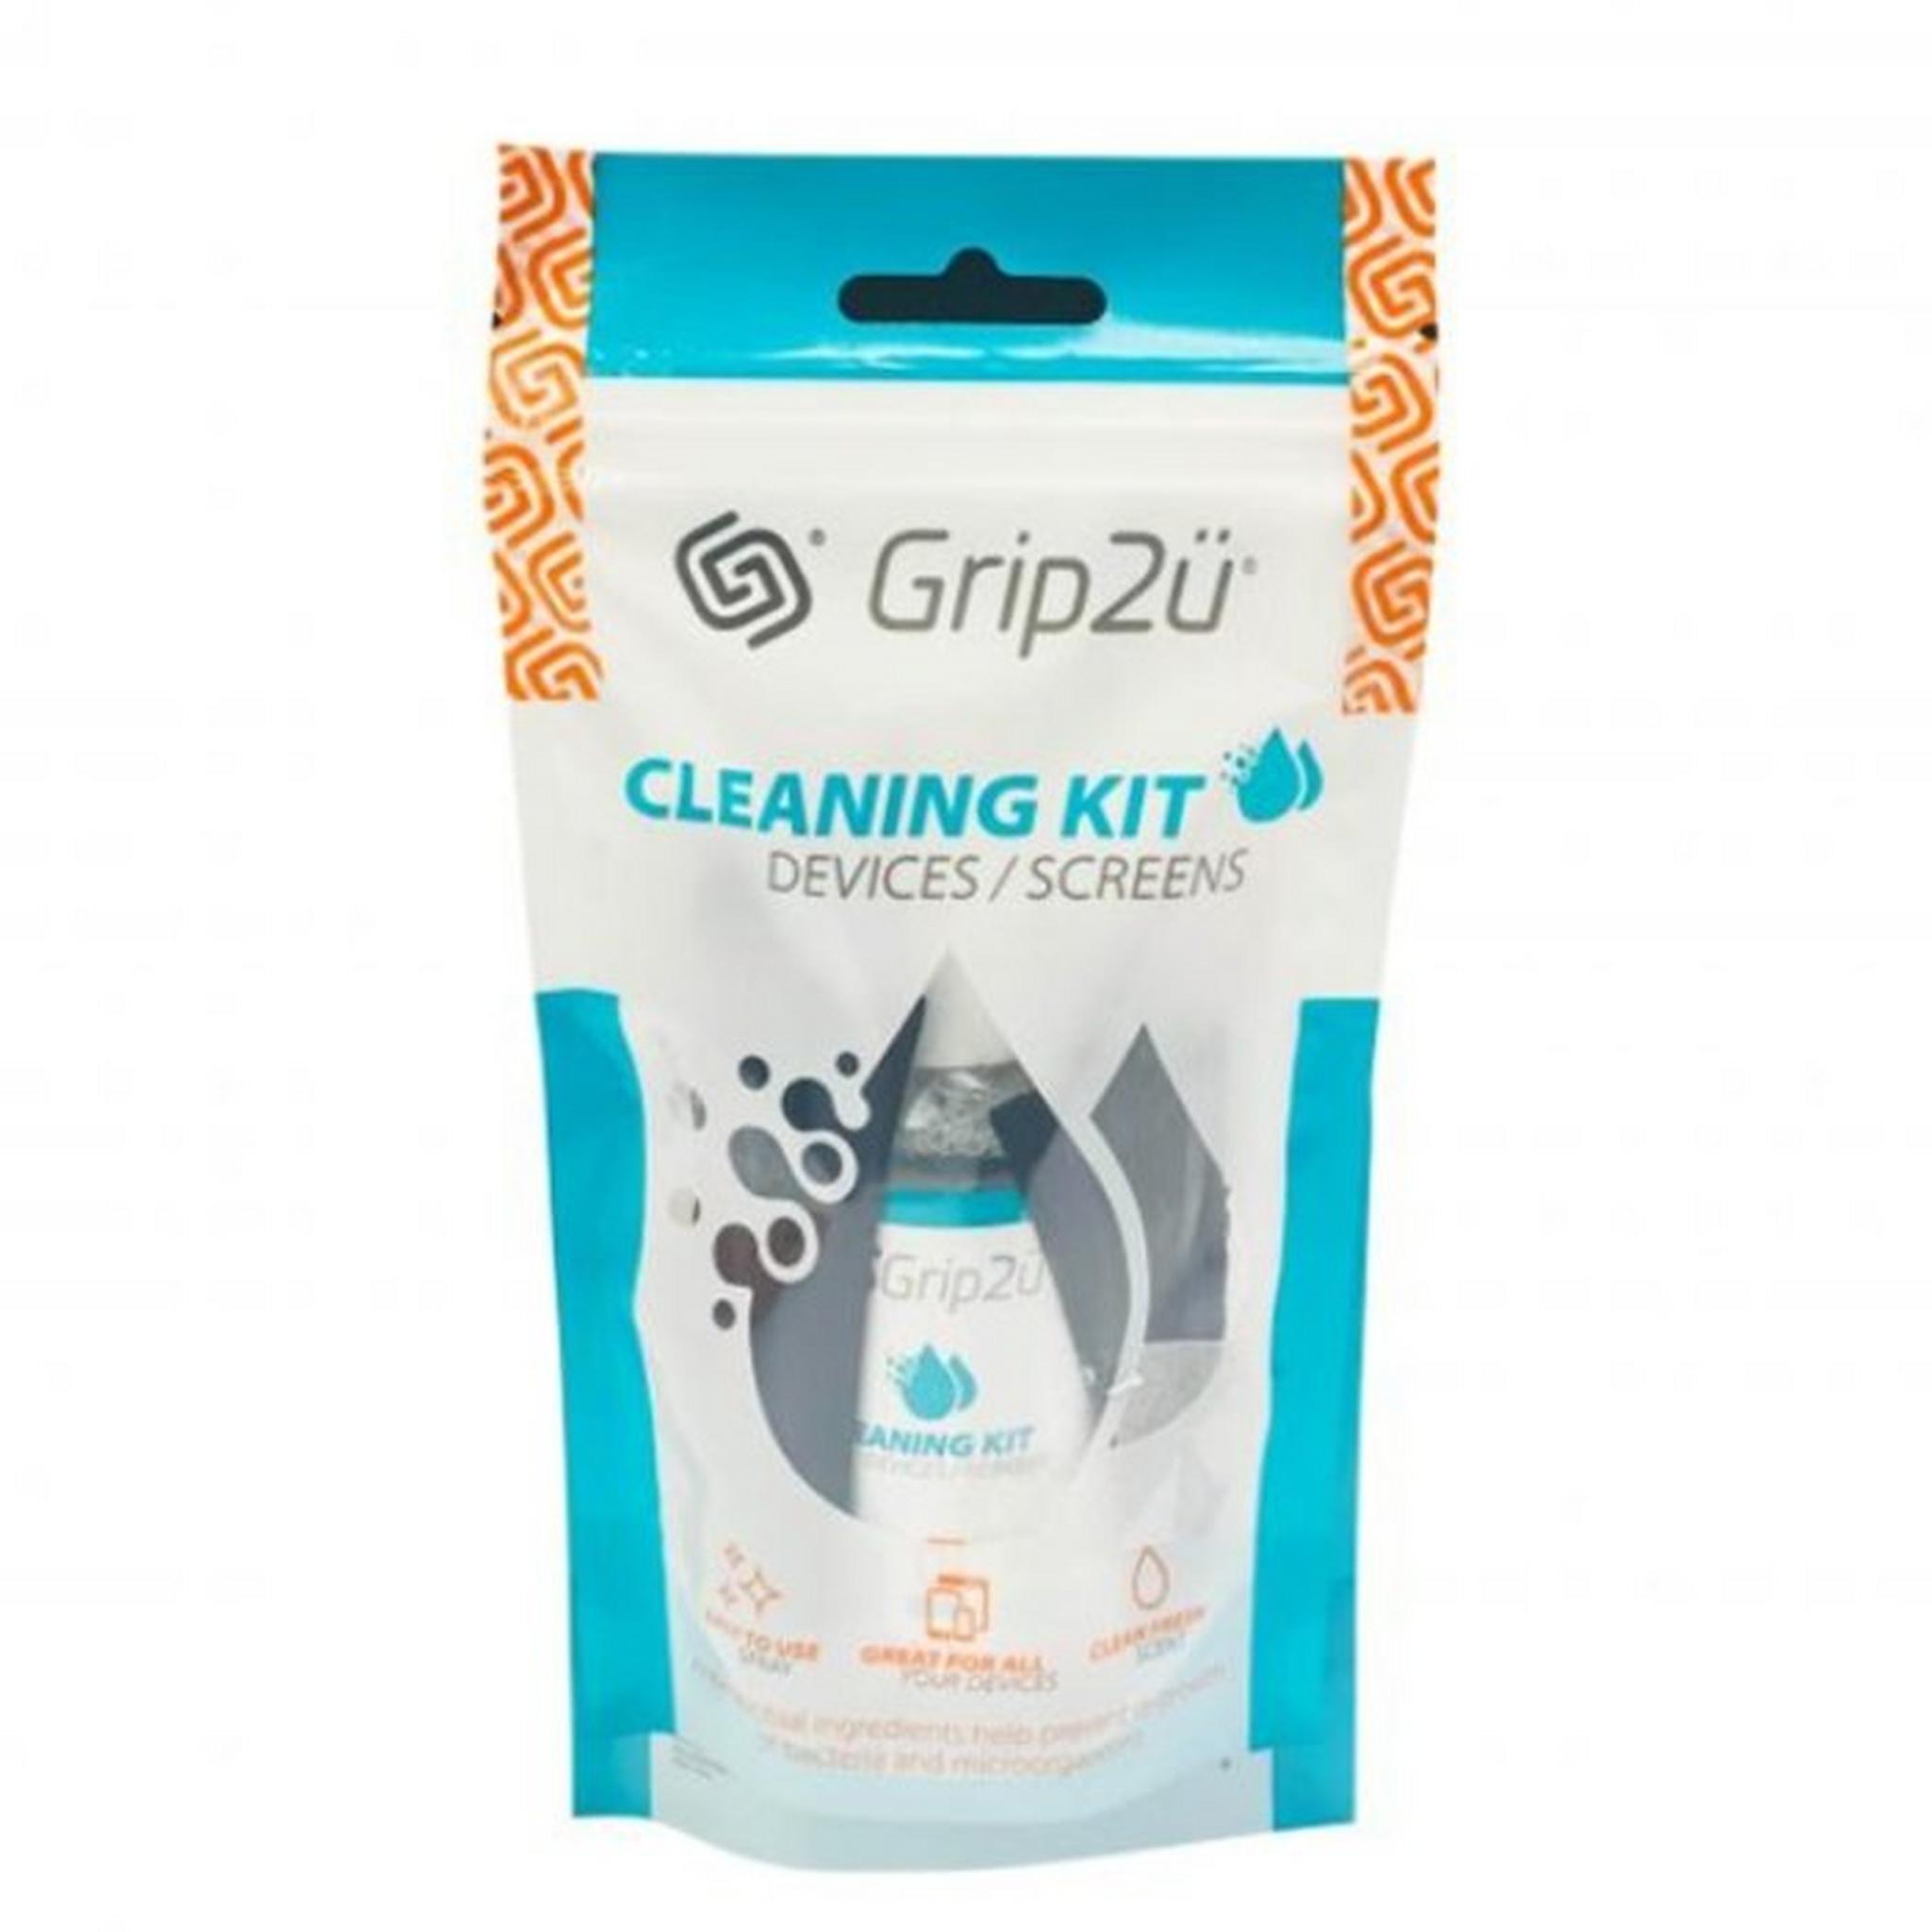 GRIP2U Cleaning Kit For Devices & Screens – 60ml